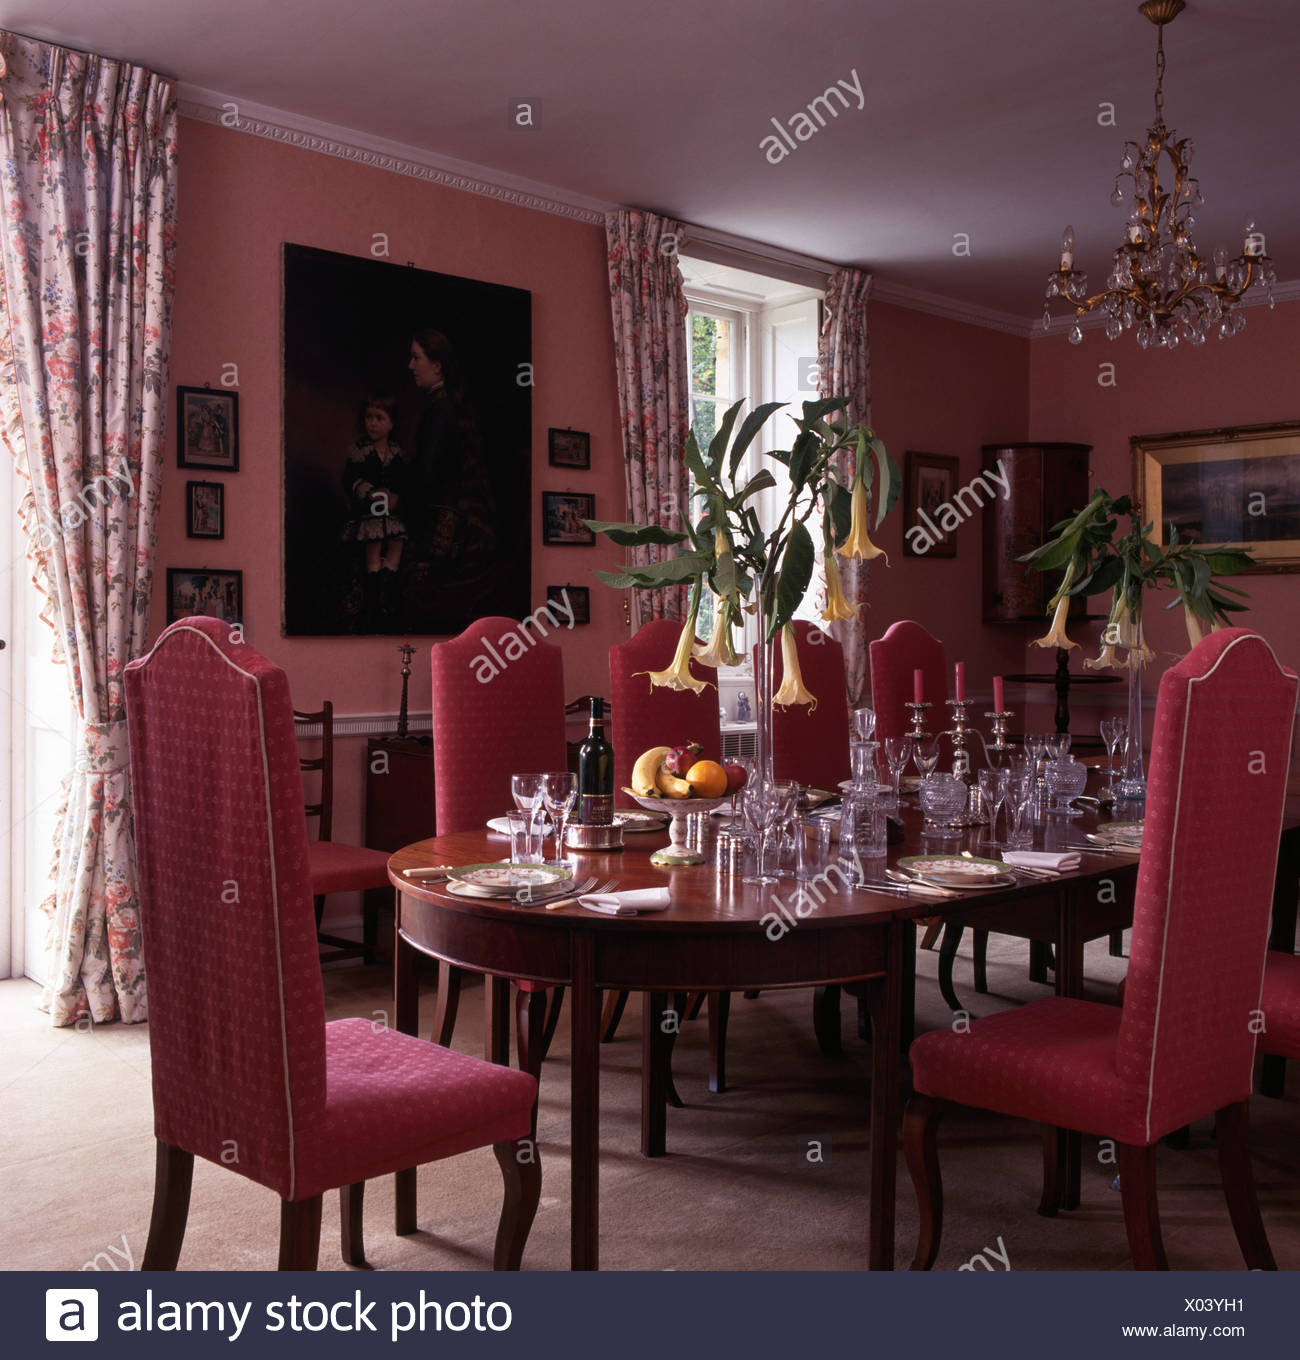 Pink Upholstered Chairs At Table Set For Lunch In Pink Nineties